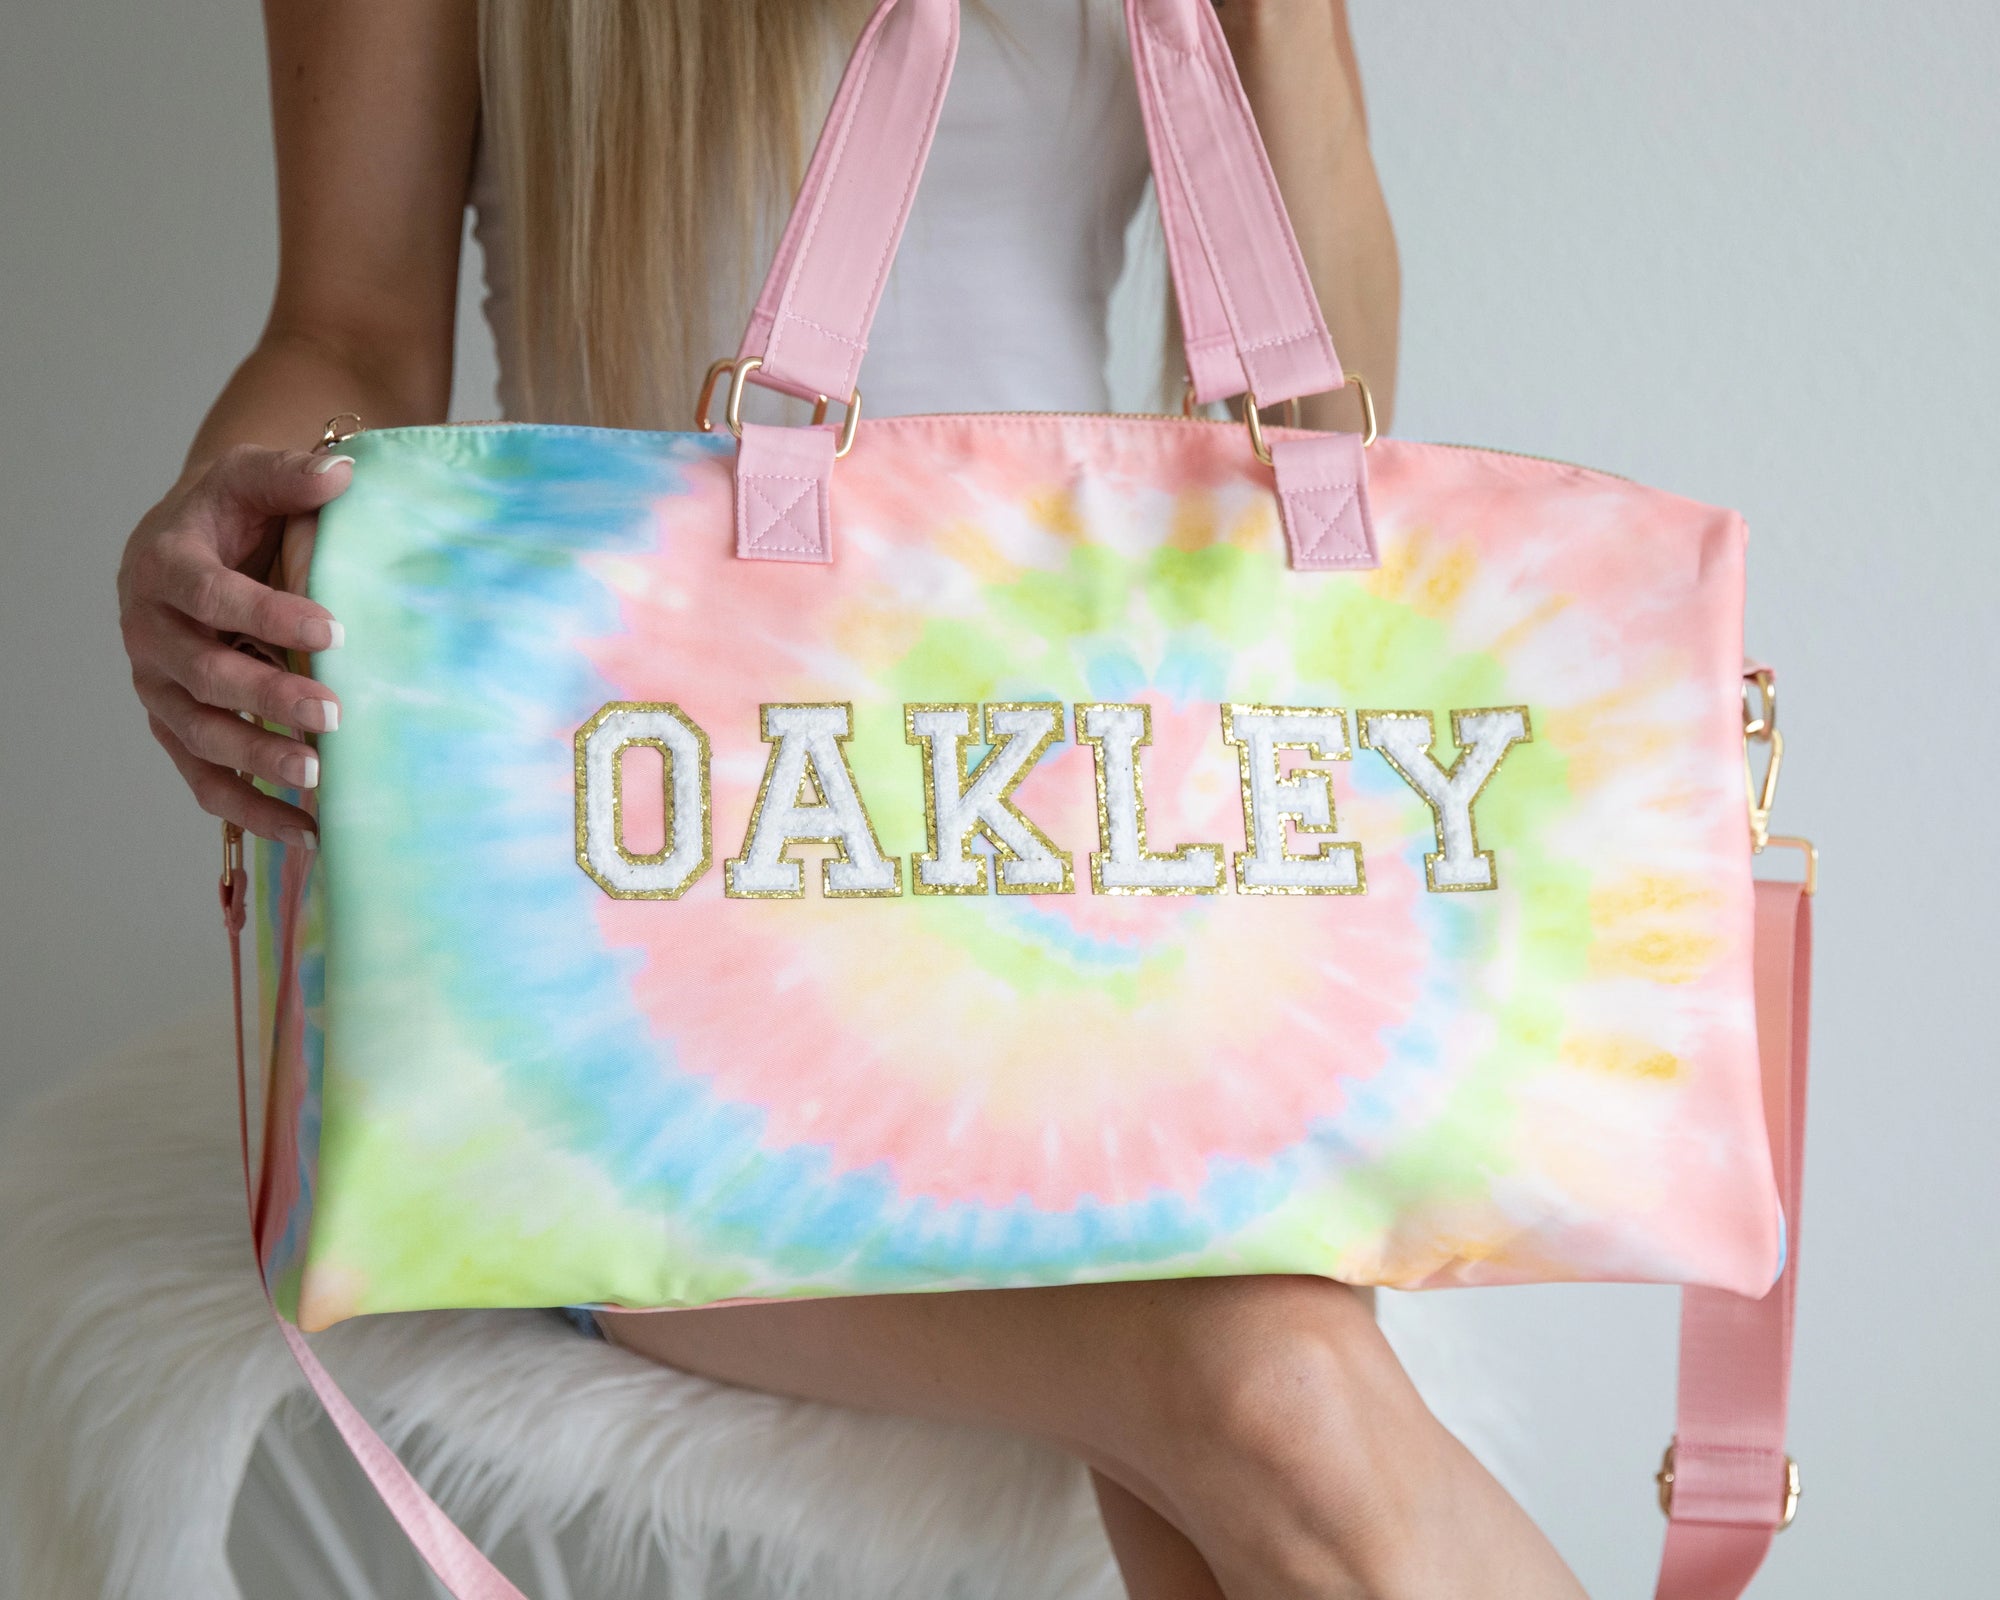 Custom Bags for Women - Personalized Totes, Handbags & Purses - Groovy Girl  Gifts